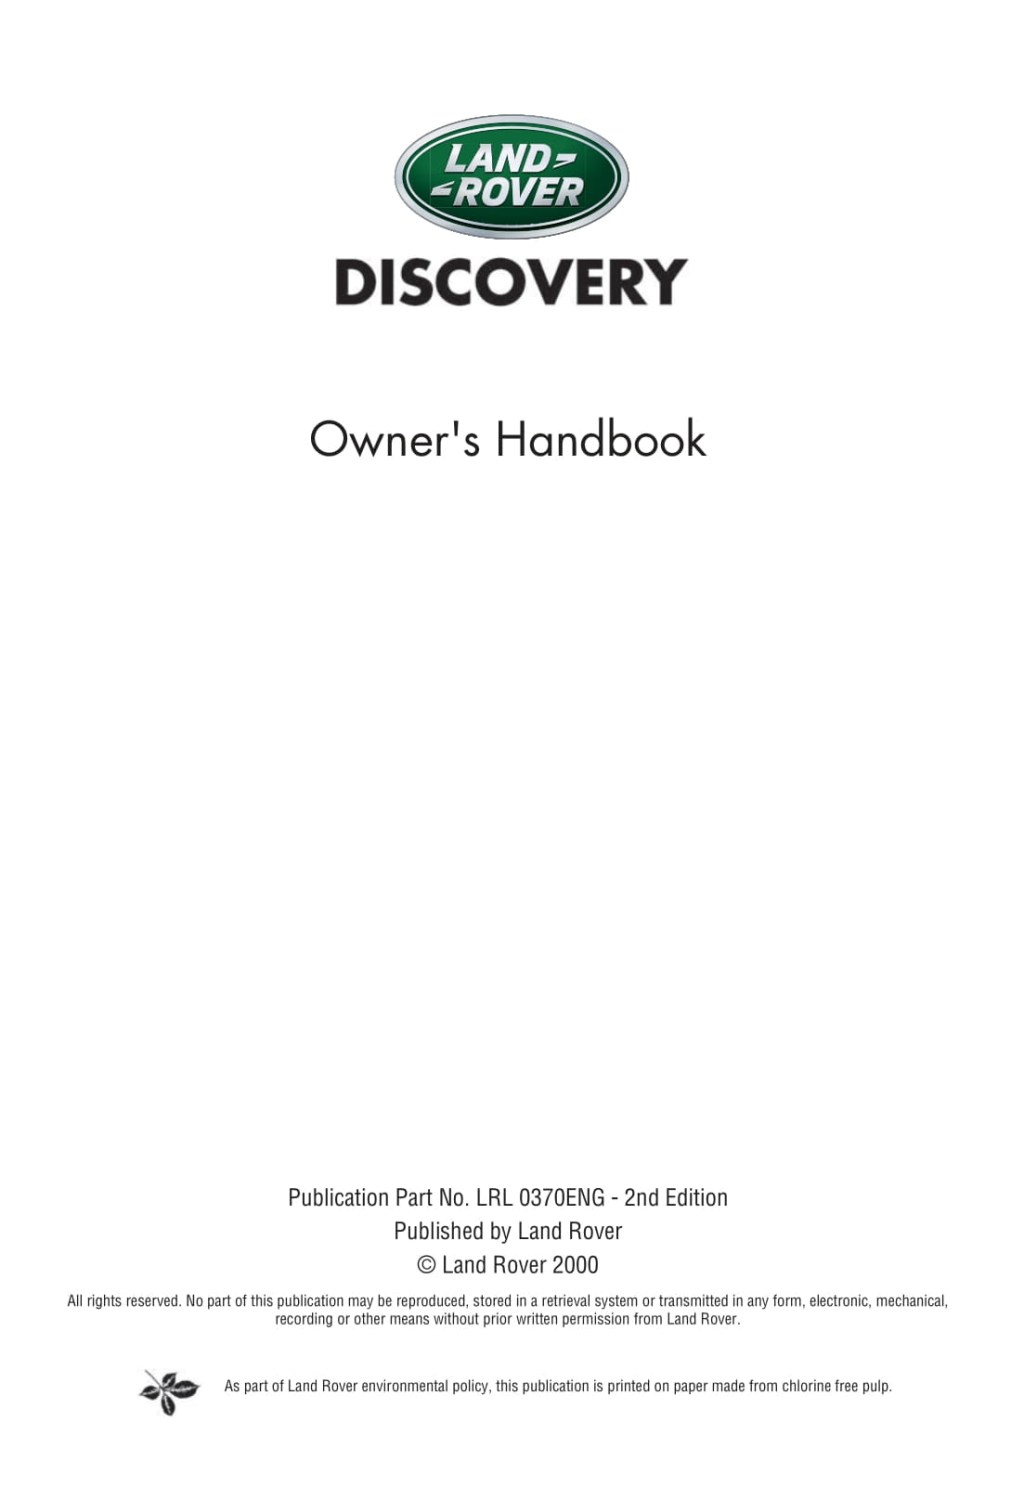 Picture of: – Land Rover Discovery  Owner’s Manual  English – Carmanuals